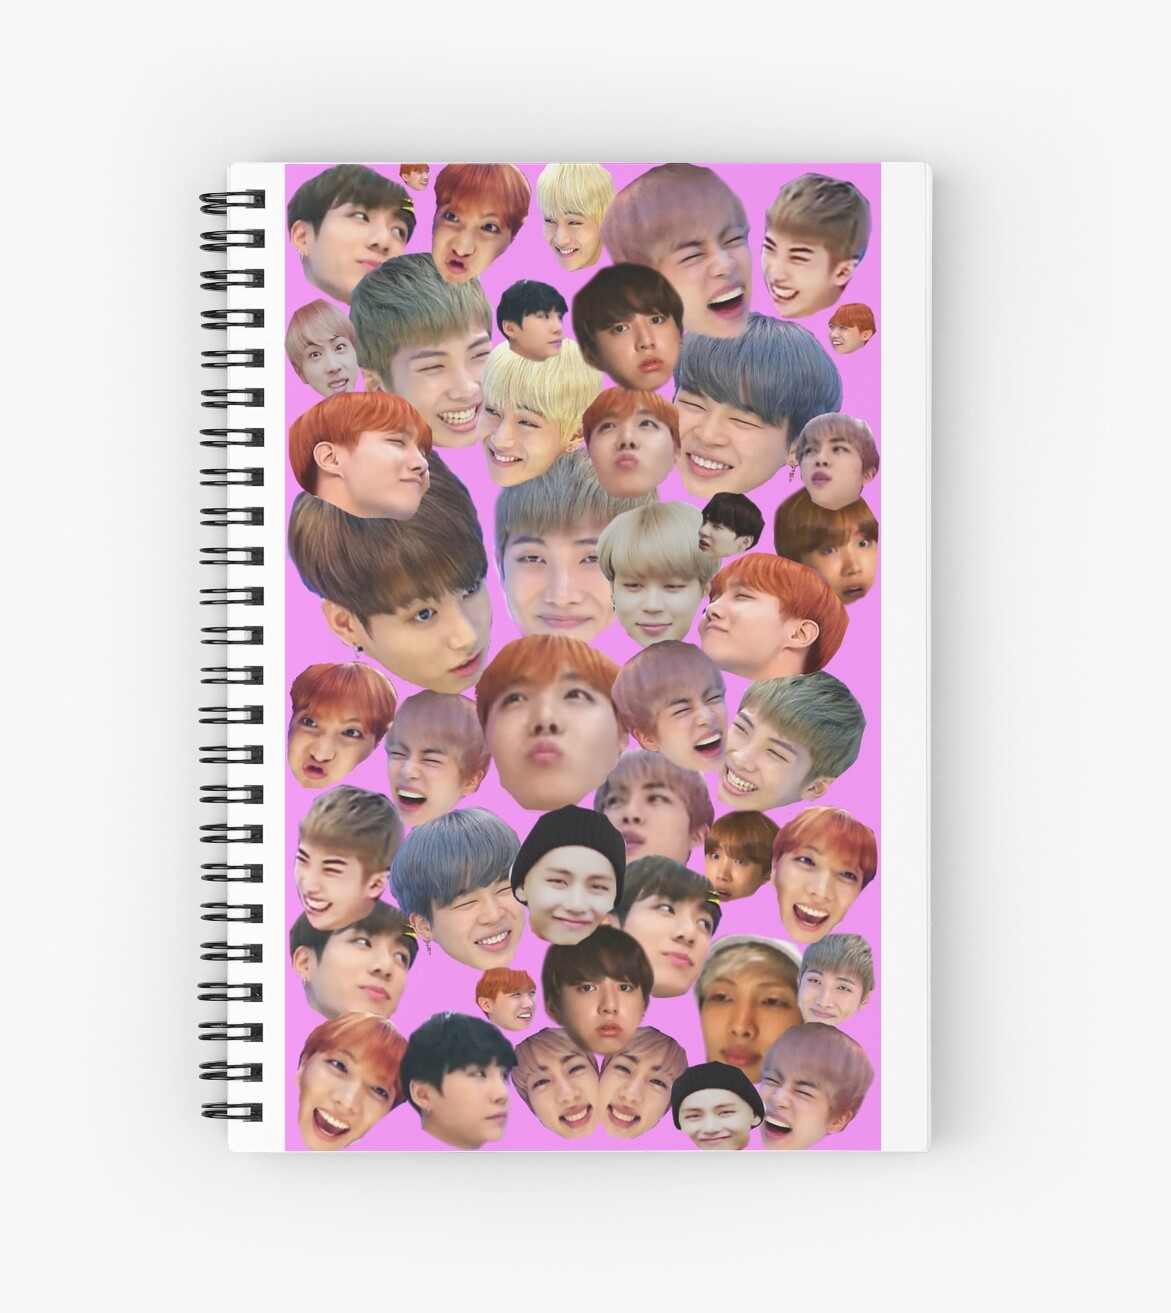 BTS Meme Collage Funny Spiral Notebooks By